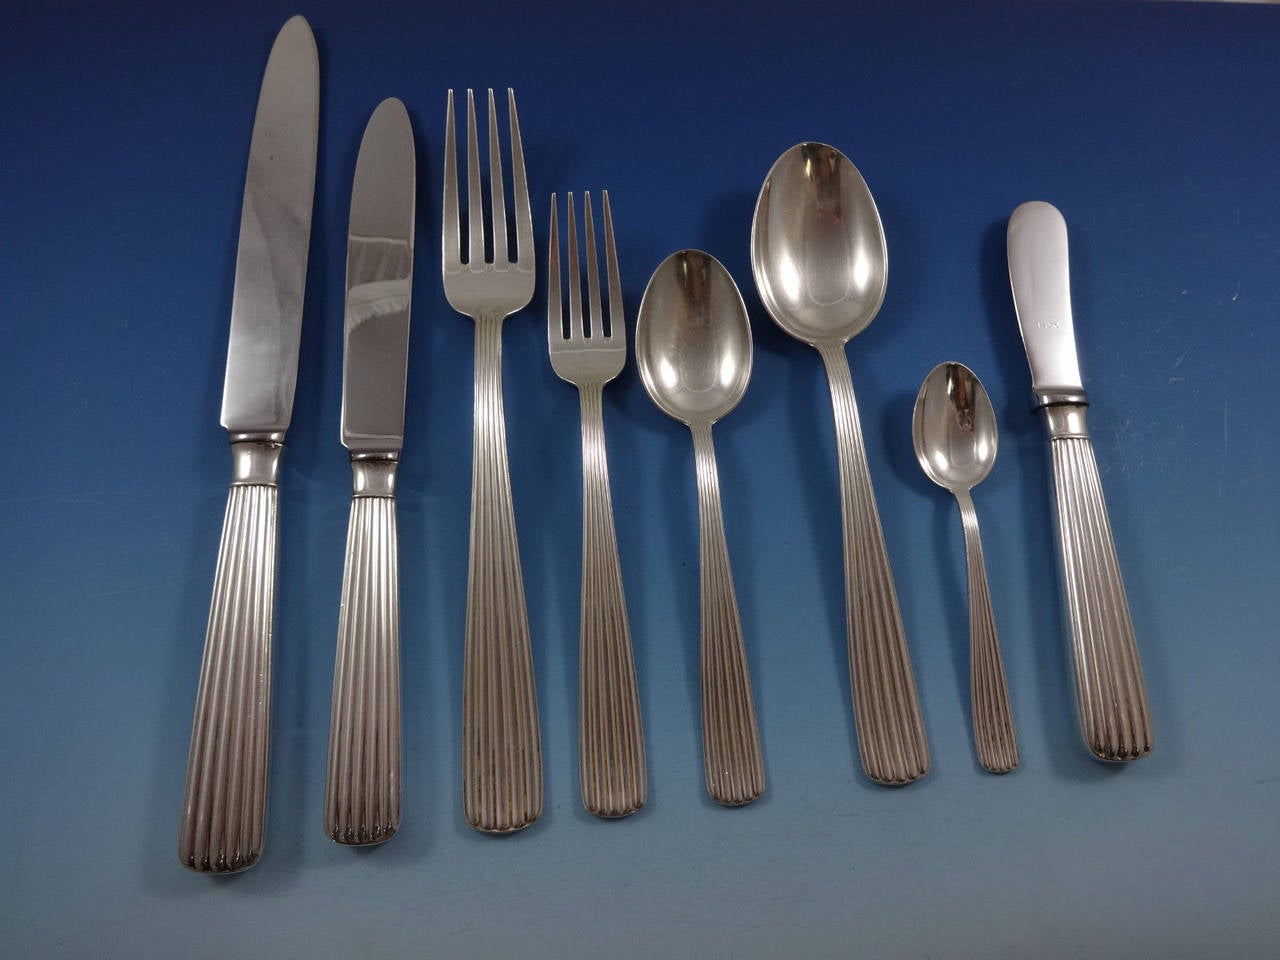 Simple elegance, handcrafted from sterling silver. Made in Italy by artisans that emphasize timeless style, integrity of materials, and pleasure of use when designing and handcrafting each piece. Fortunoff tableware is delicately crafted, and each